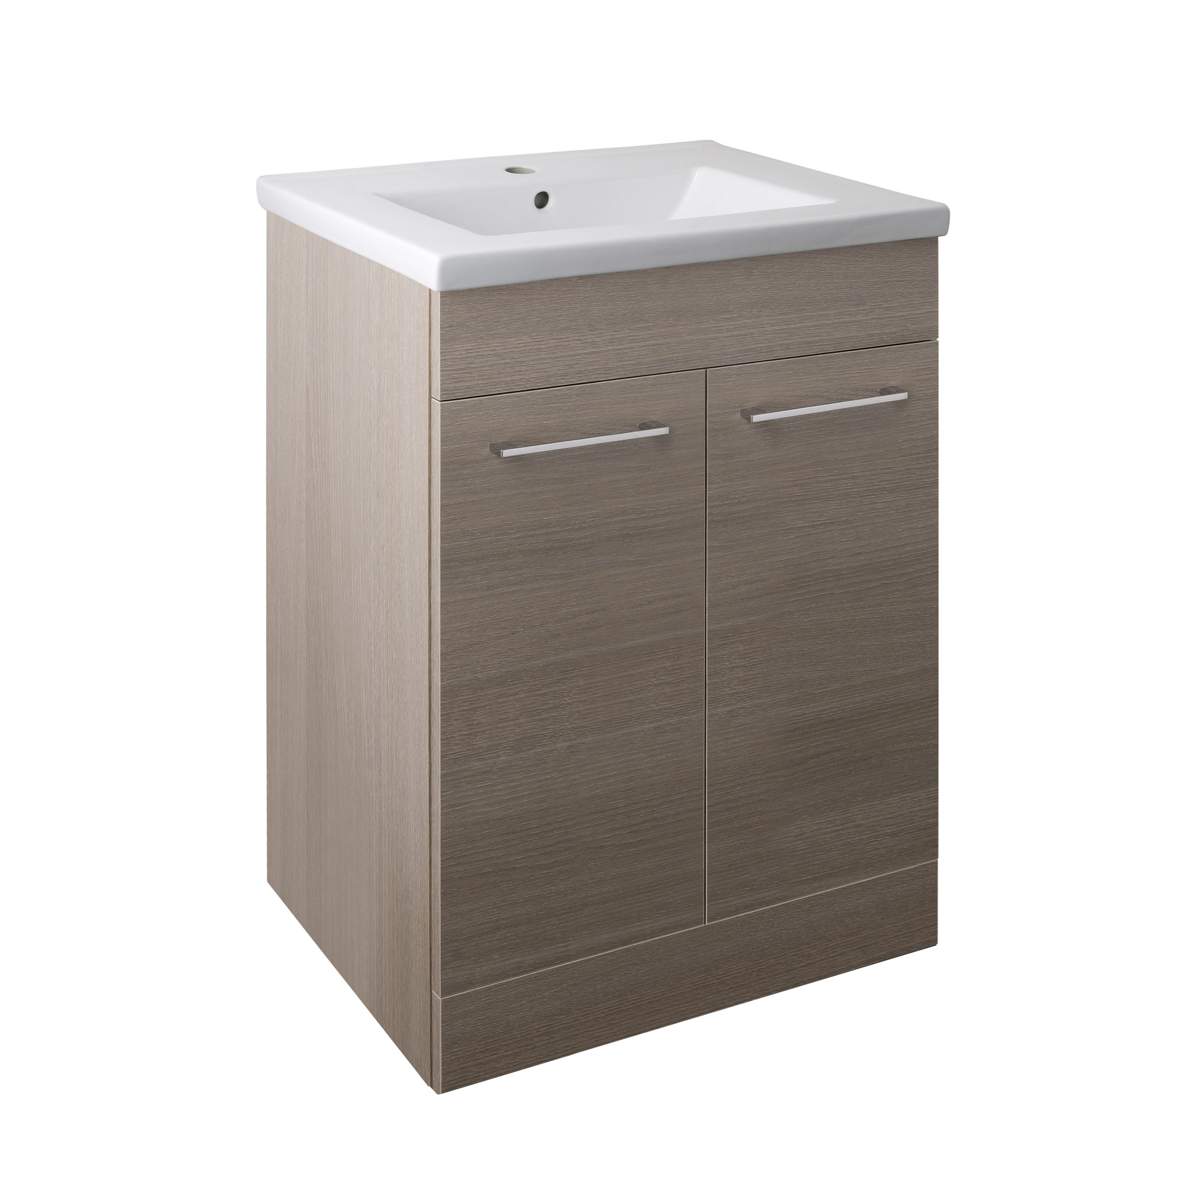 JTP Pace Units 600mm Floor Mounted Unit with Doors and Basin in Grey (PFS602GR + P600BS)